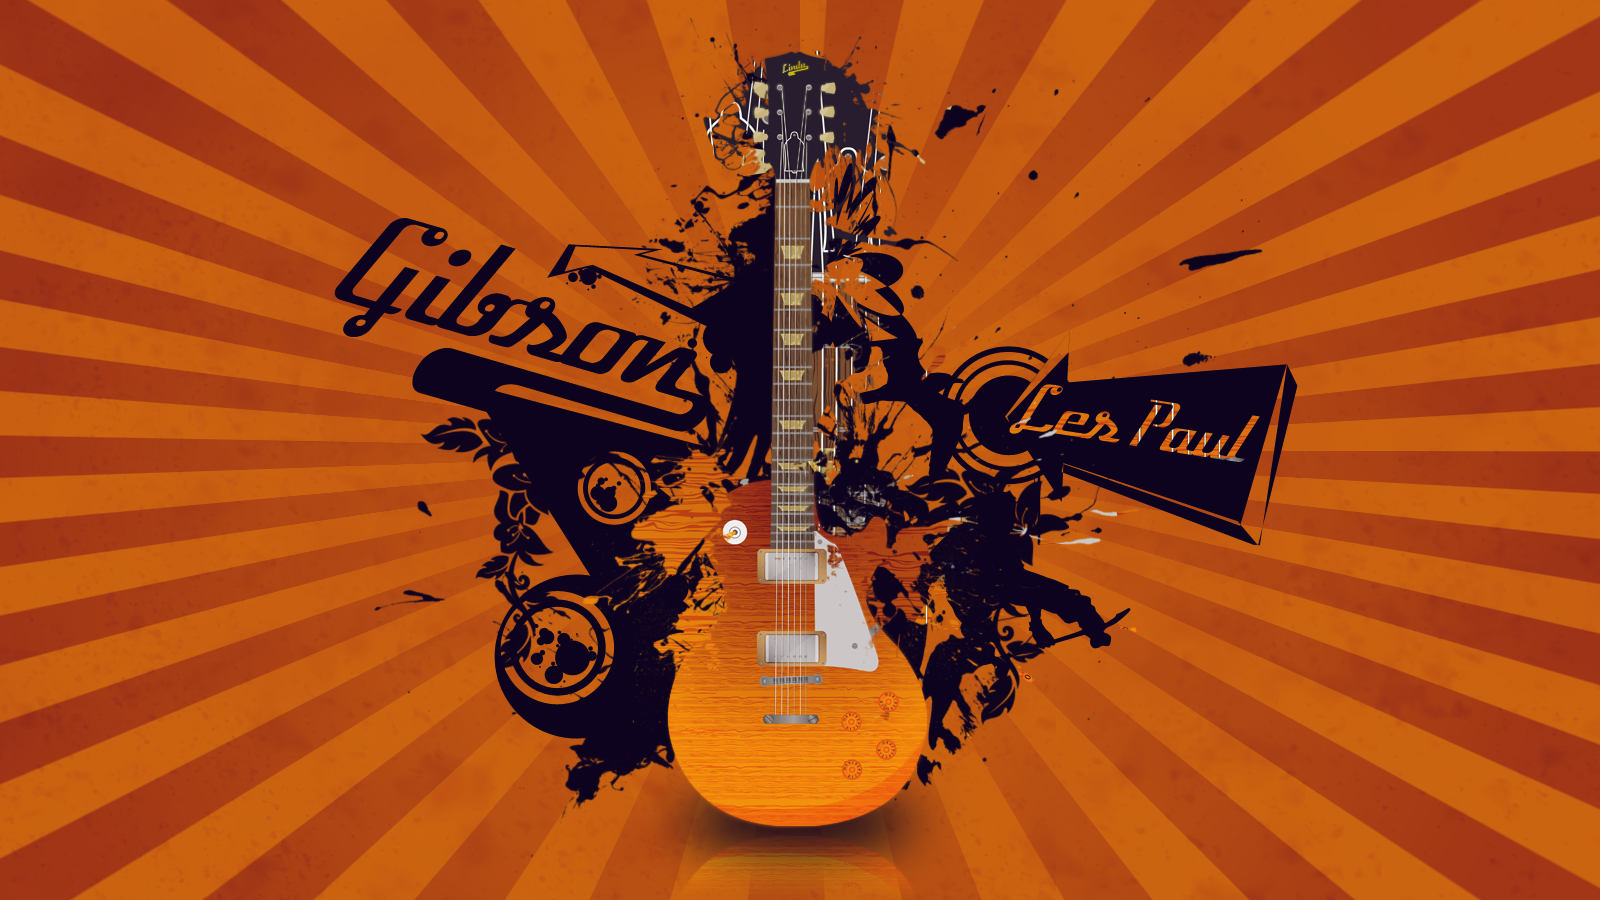 Gibson Les Paul Wallpaper By Blackcan1122